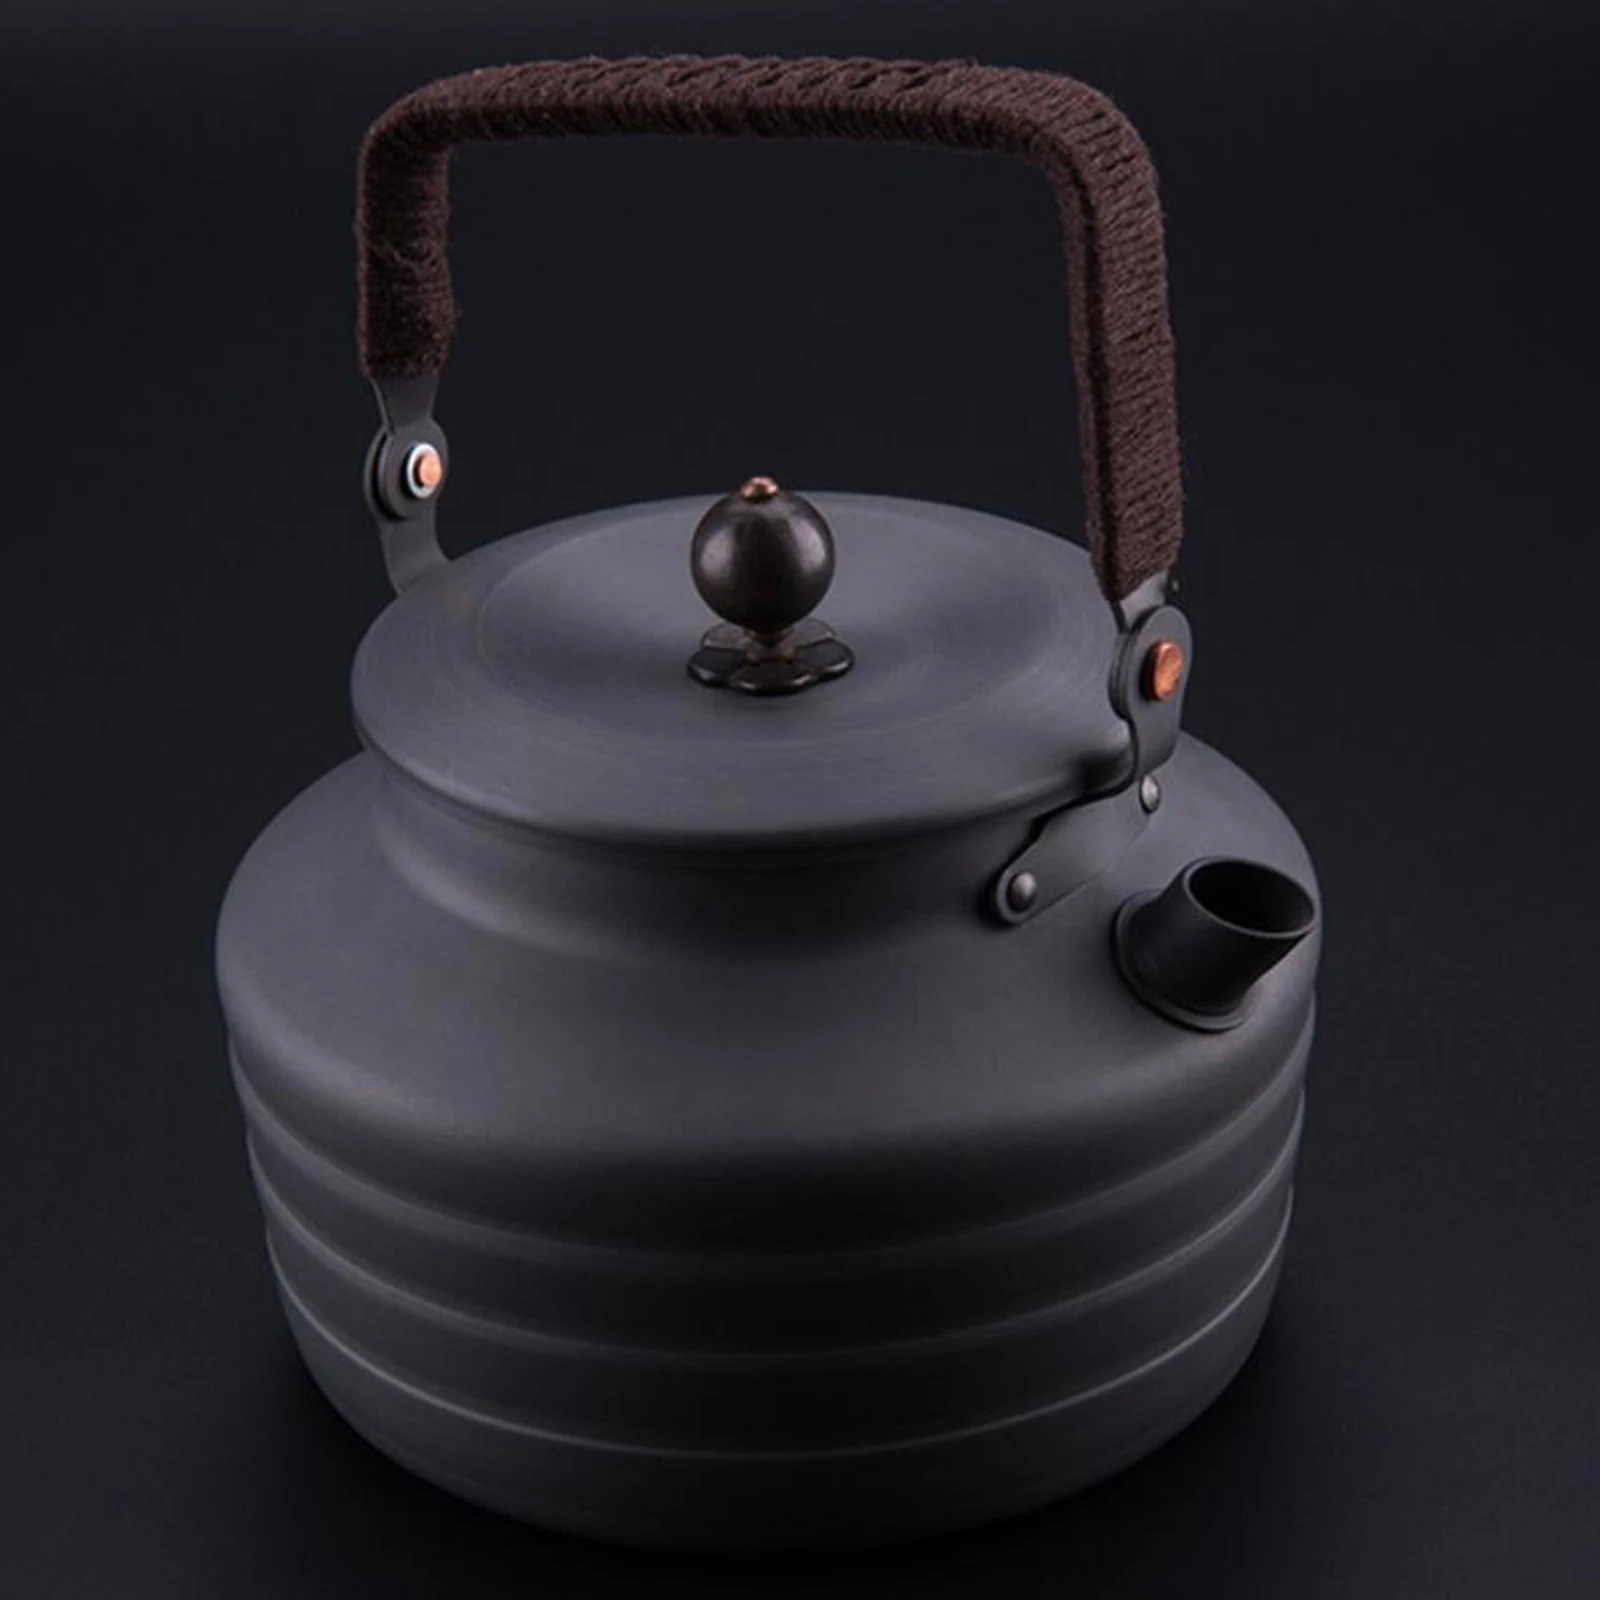 Portable Outdoor Aluminum Alloy Water Kettle Teapot Coffee Pot 1.3L Tableware Cookware For Picnic Camping Hiking Travel